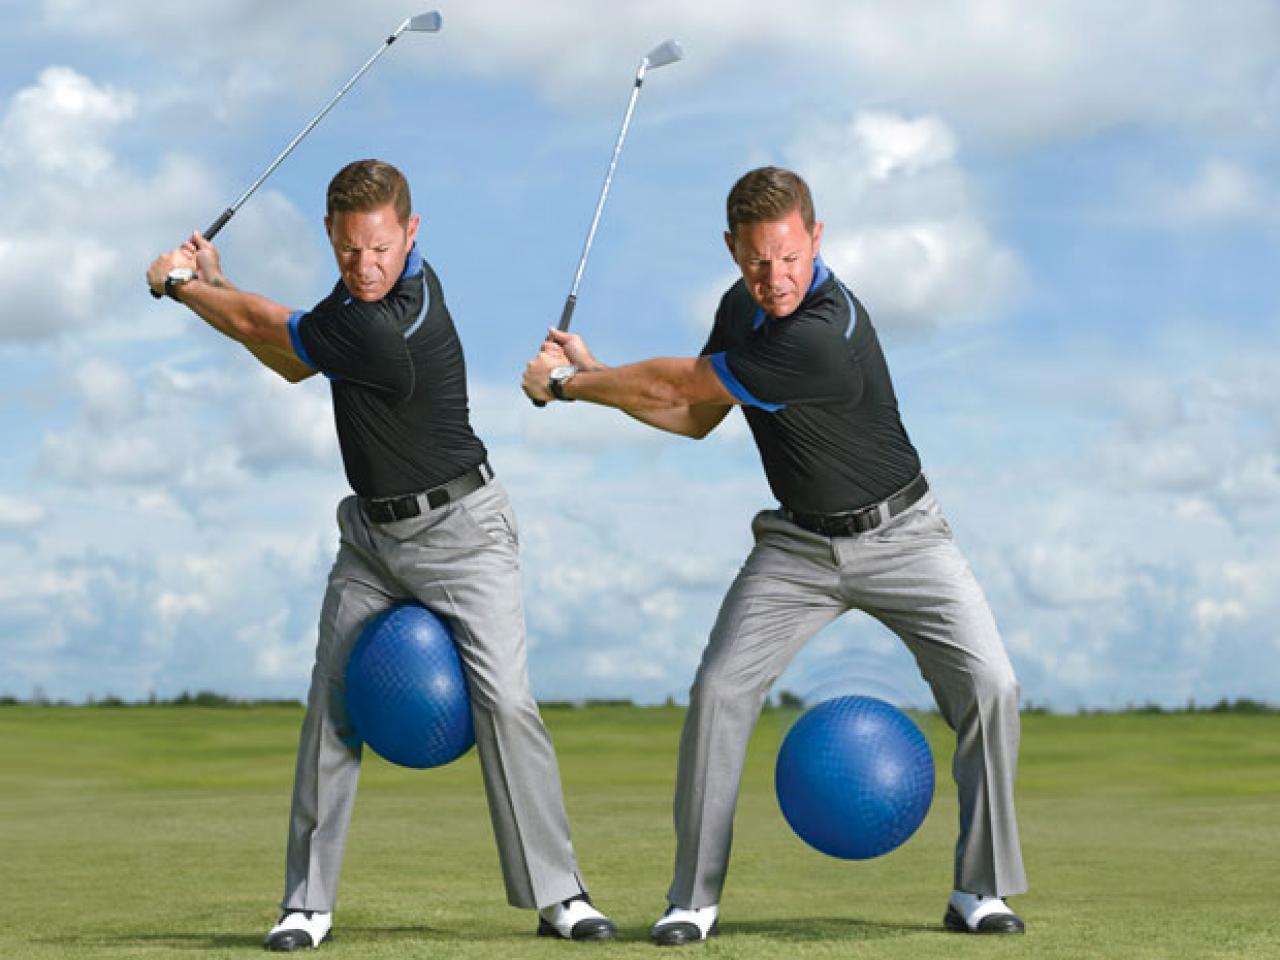 Sean Foley: Swing Like A Powerlifter | How To | Golf Digest